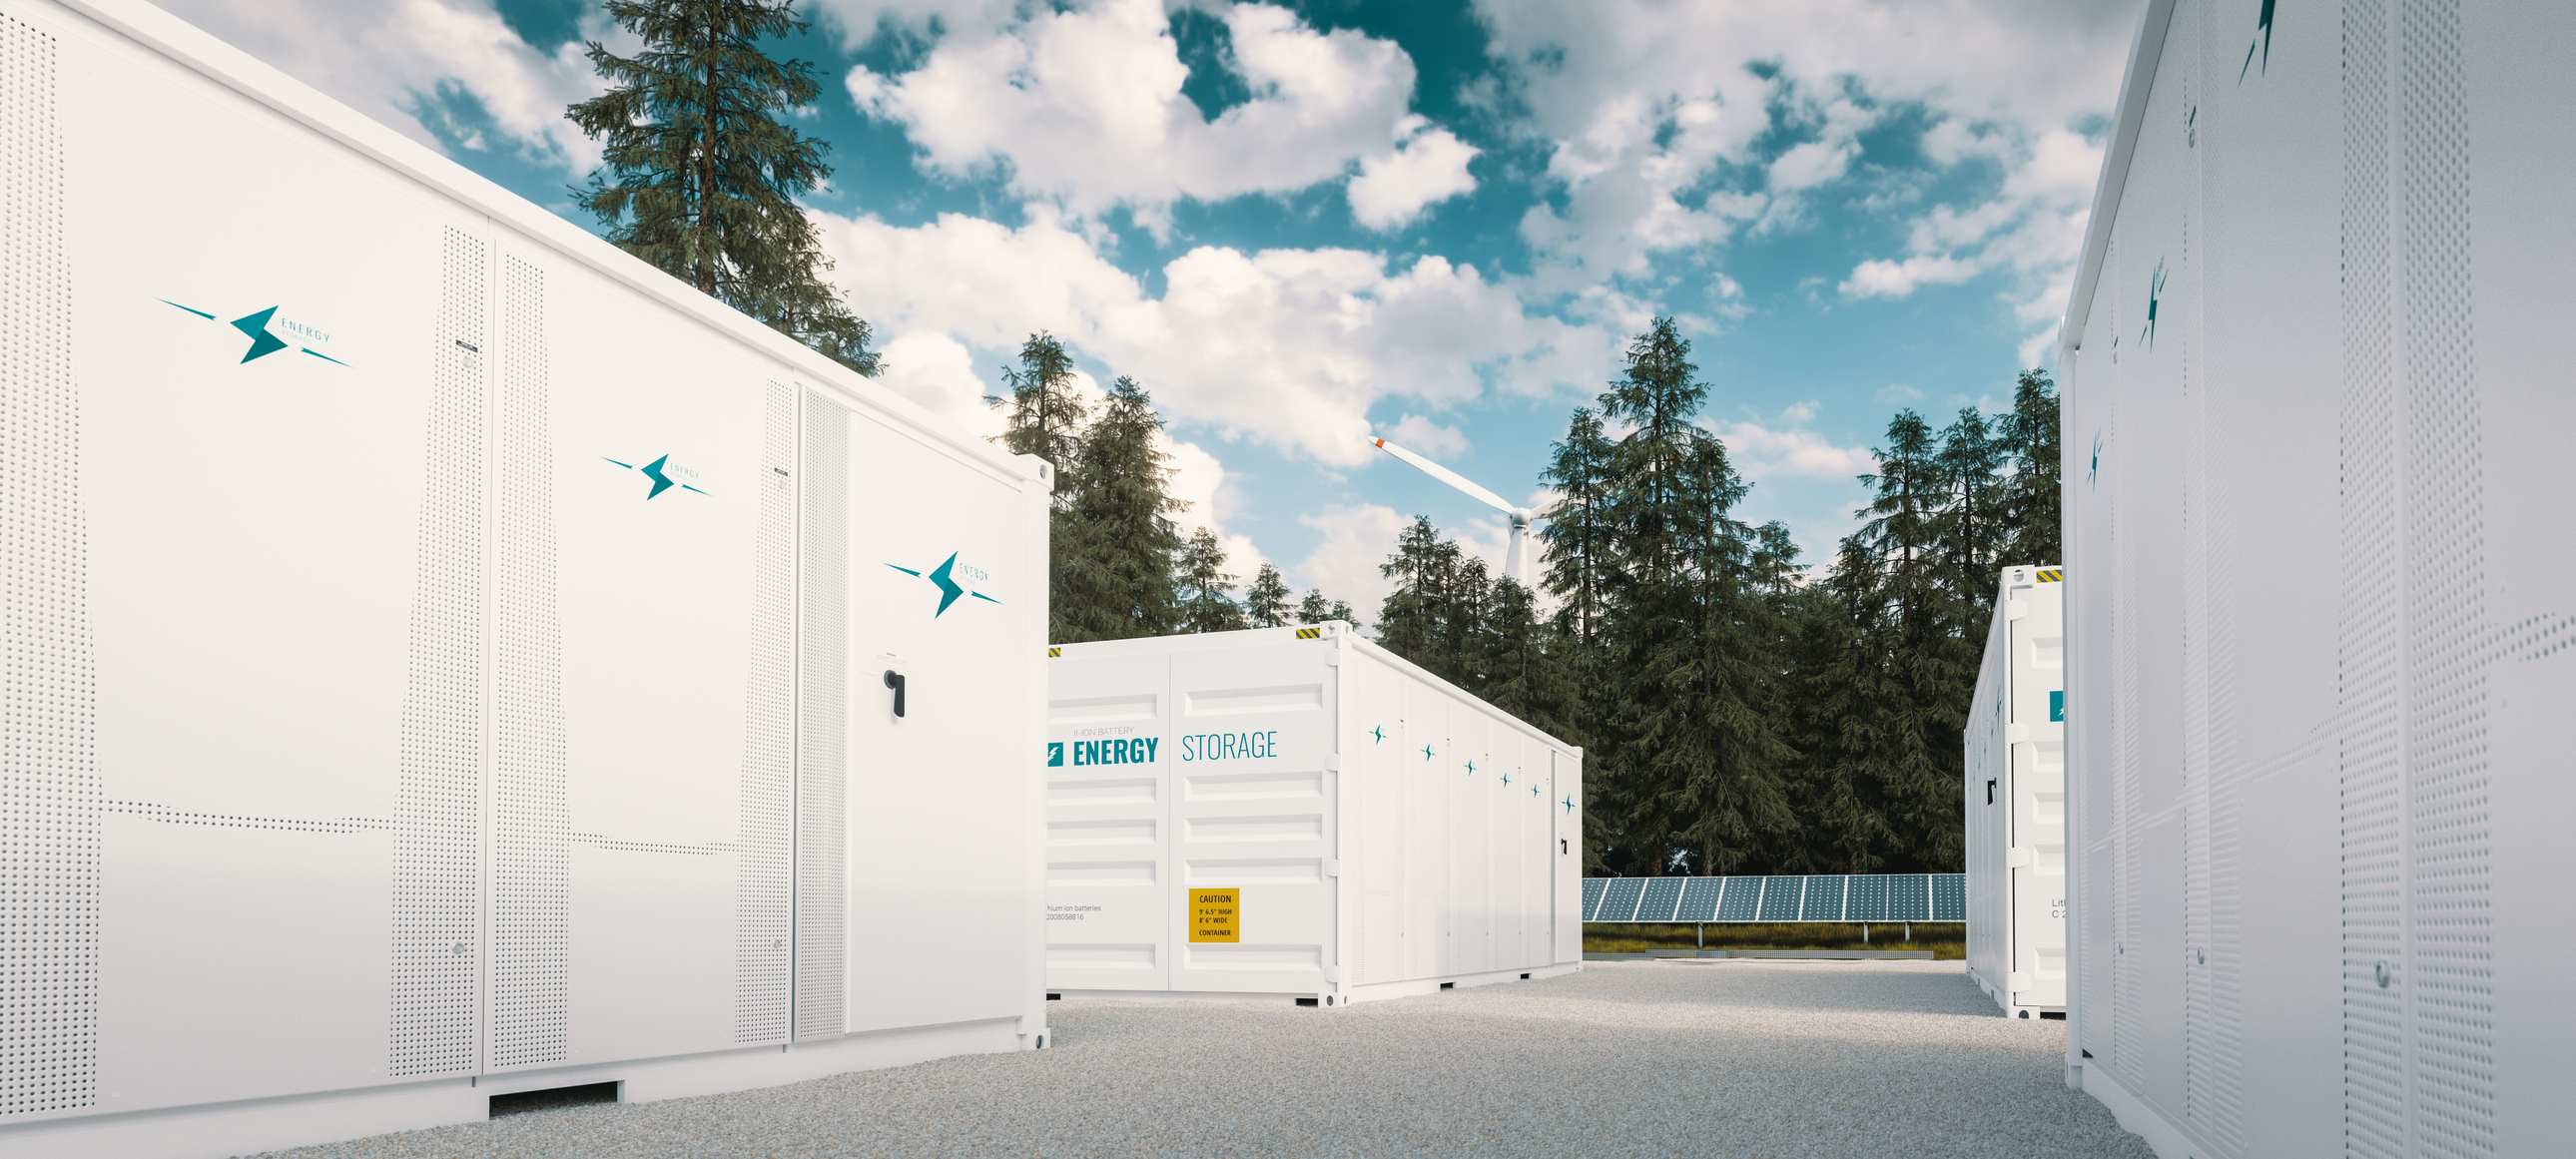 Grid-scale batteries with wind and solar in background